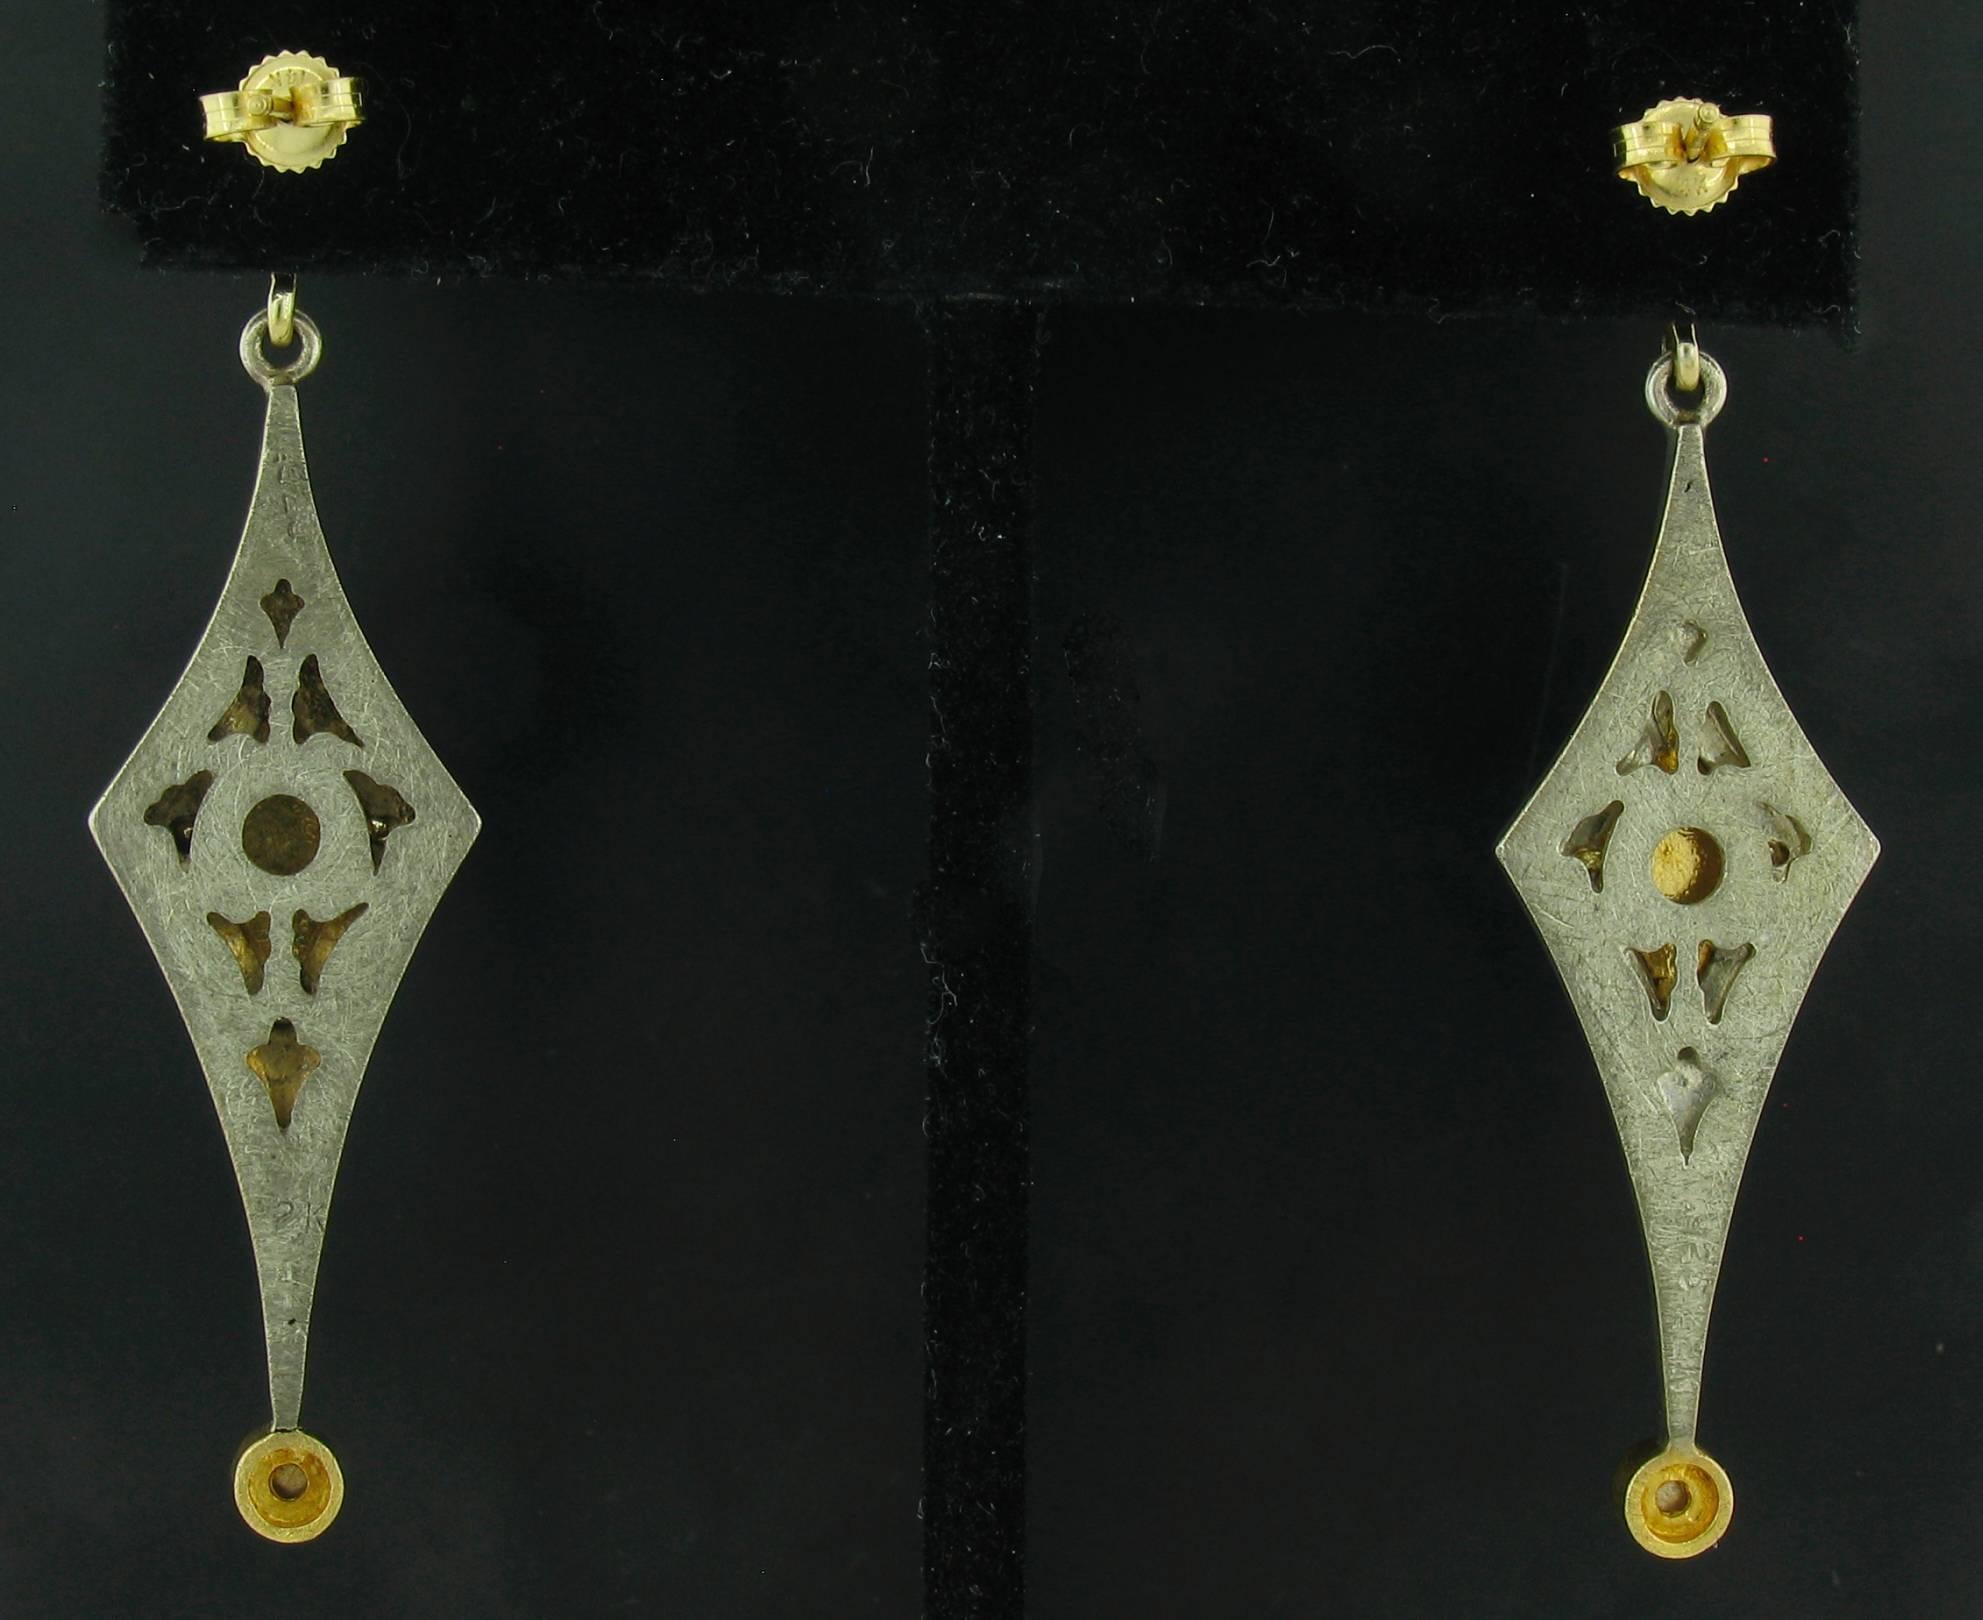 These Earrings were designed and made by well known designer Victor Velyan.  They contain 2 faceted, round Peridots weighing 1.78 carats, and Rosecut and Pave Diamonds weighing a total of 1.17 carats.  They are made of a base of Silver with all